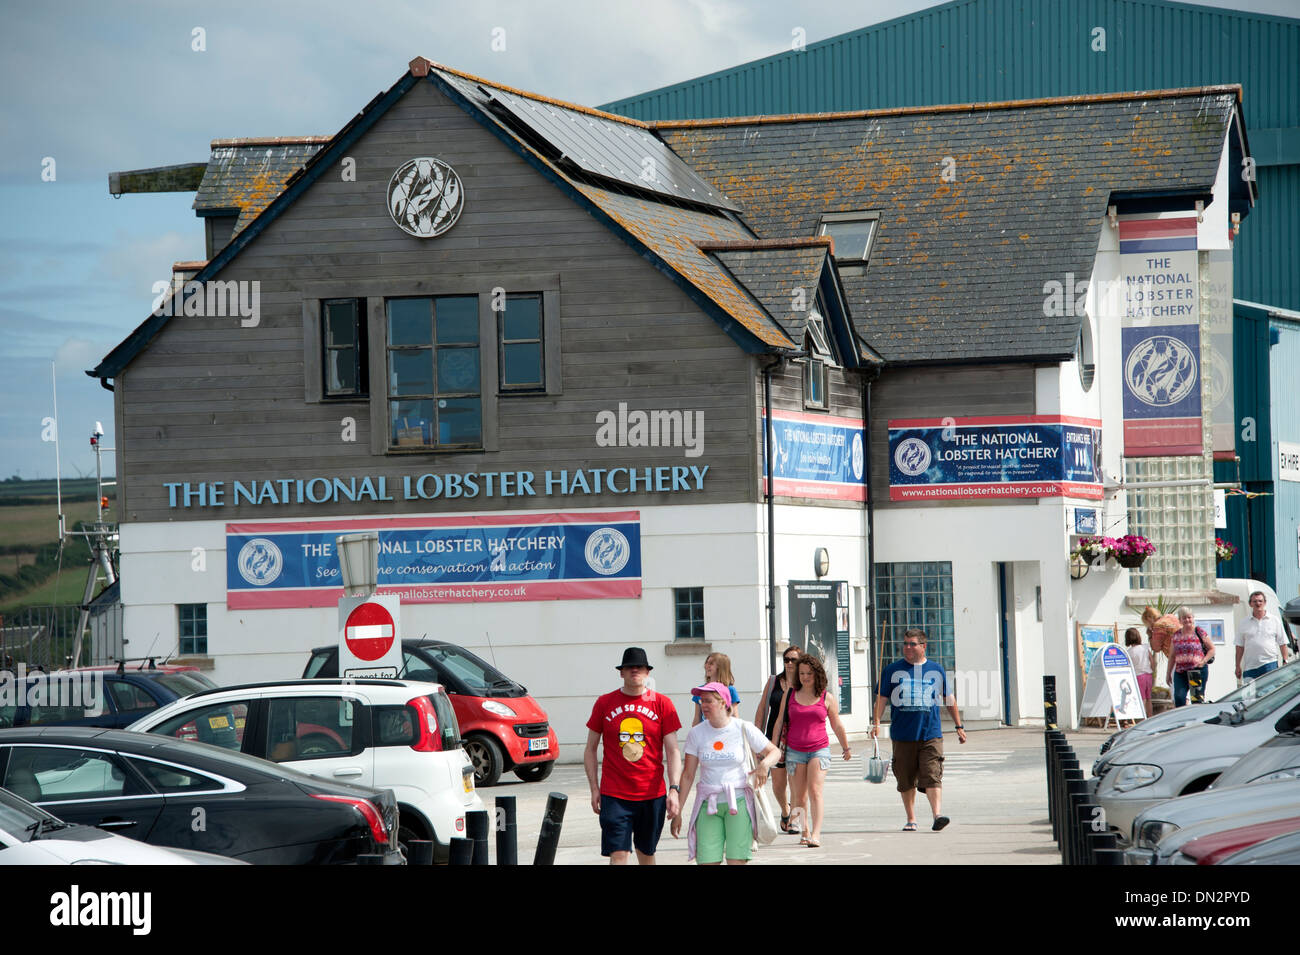 The National Lobster Hatchery Padstow Cornwall Stock Photo